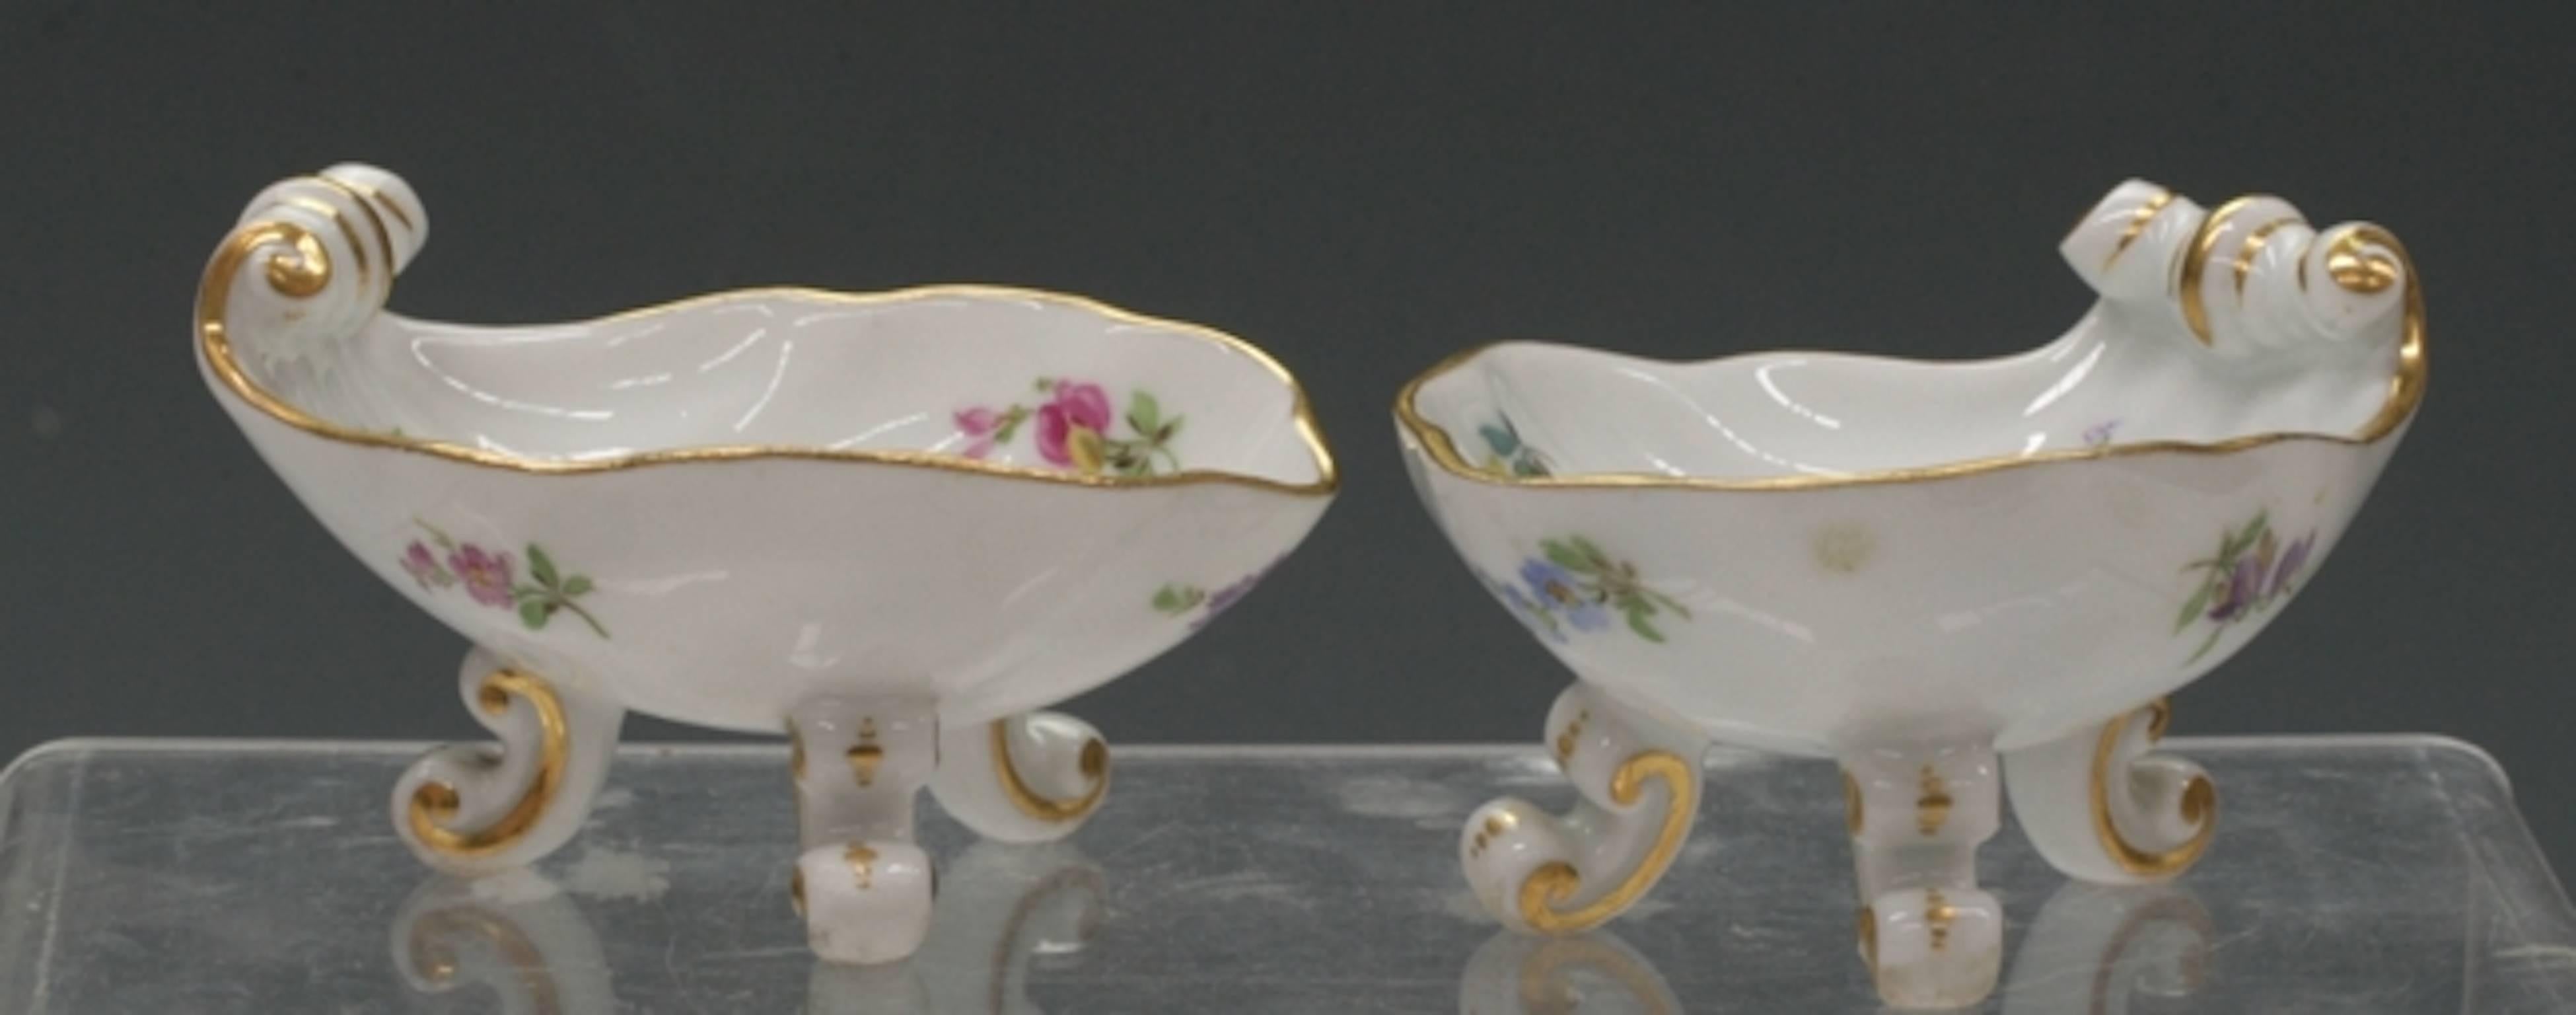 Meissen set includes two footed creamers and two footed dishes with tray. Tripod legs decorated with floral sprays. Blue cross mark on base.
Measure: Creamers 2.63